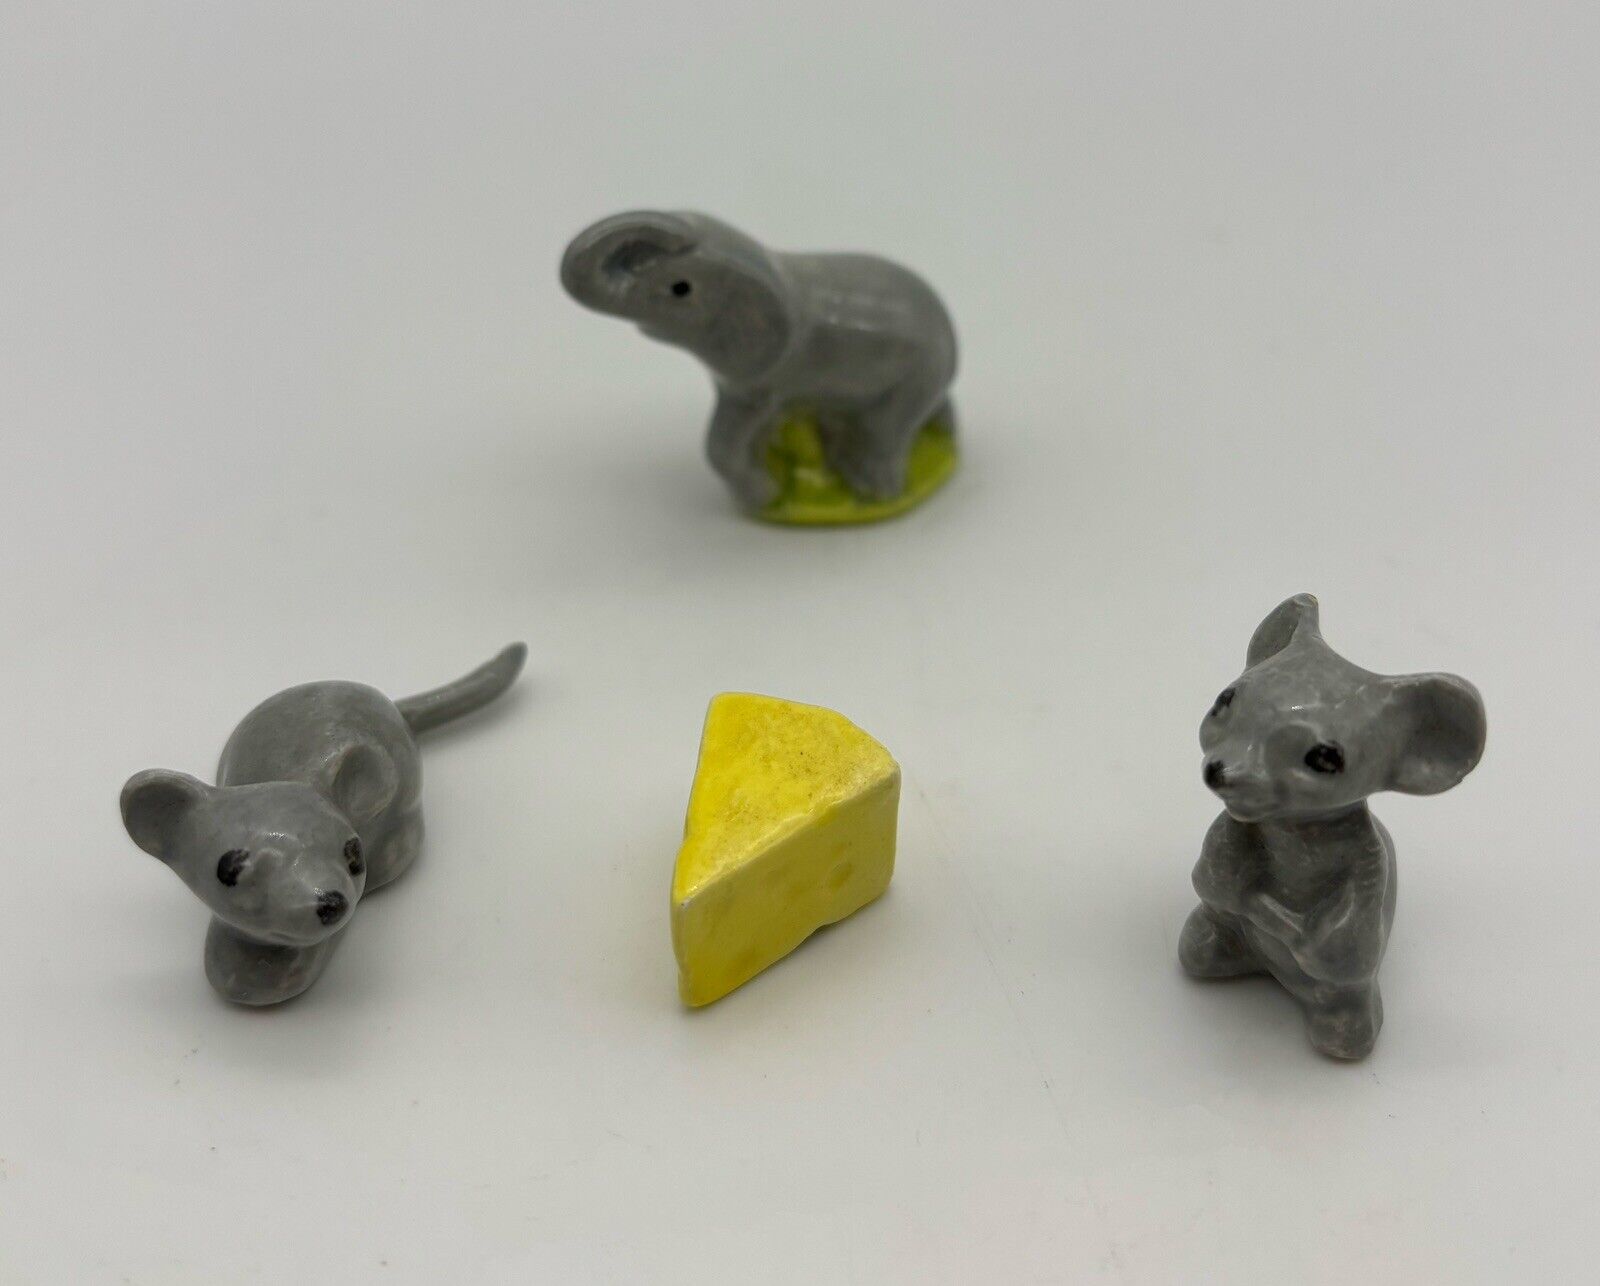 Miniature Vintage Ceramic Tiny Mouse Figurines With Cheese Elephant Dollhouse